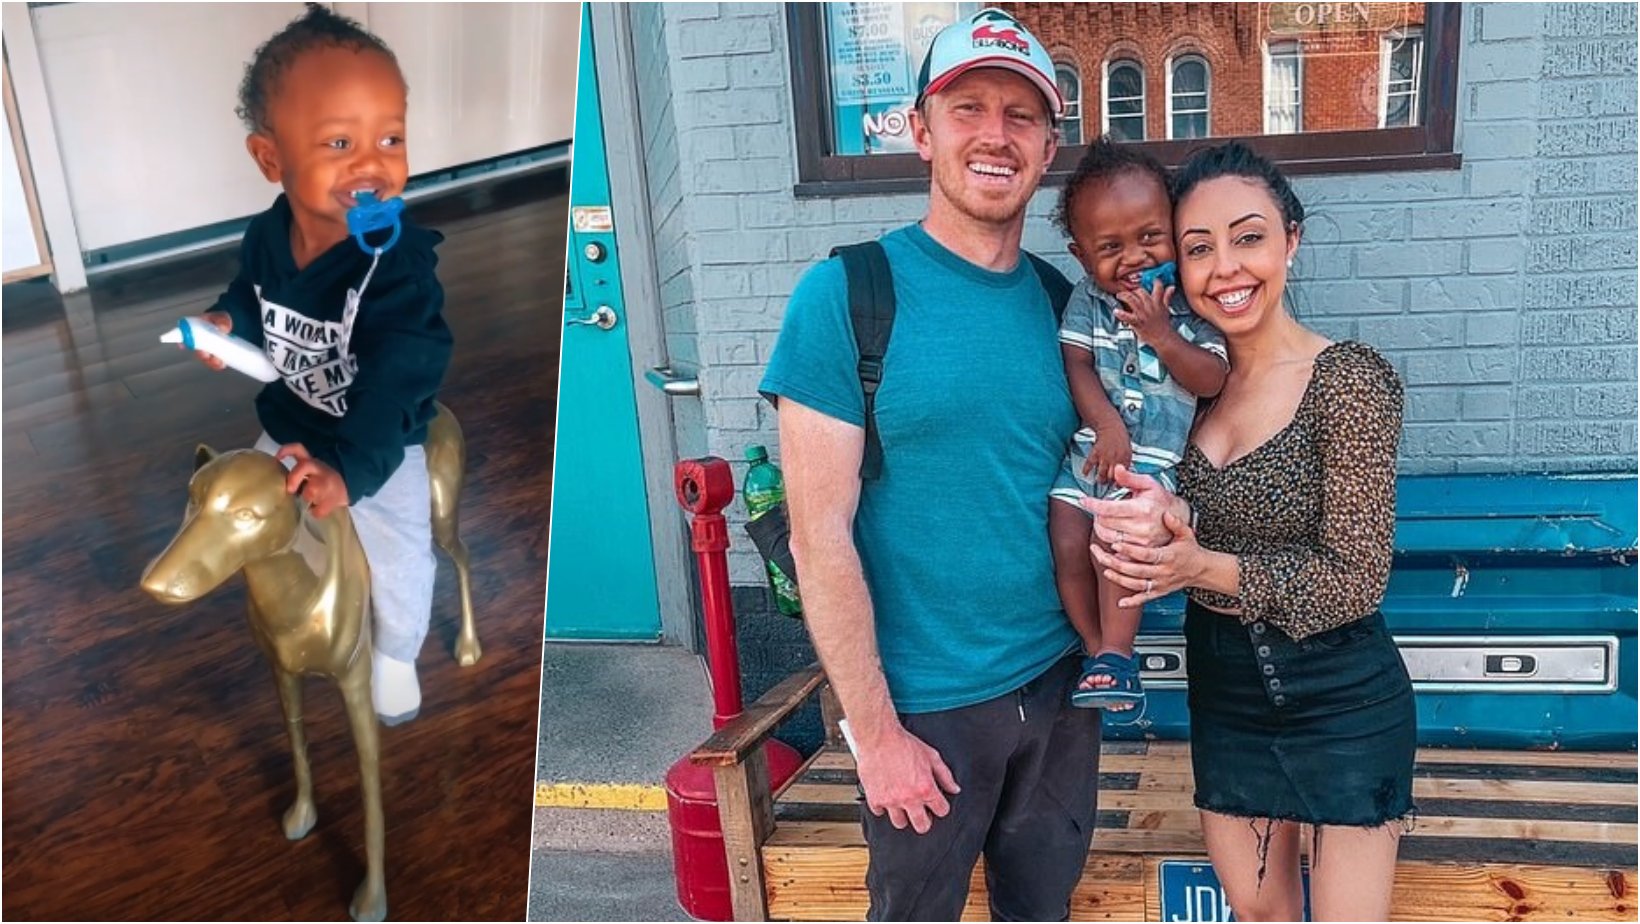 6 facebook cover.png?resize=412,232 - Couple Claps Back At Critics Who Claim They Can't Take Care Of Their Adopted Baby's Hair Or Teach Him About Police Profiling